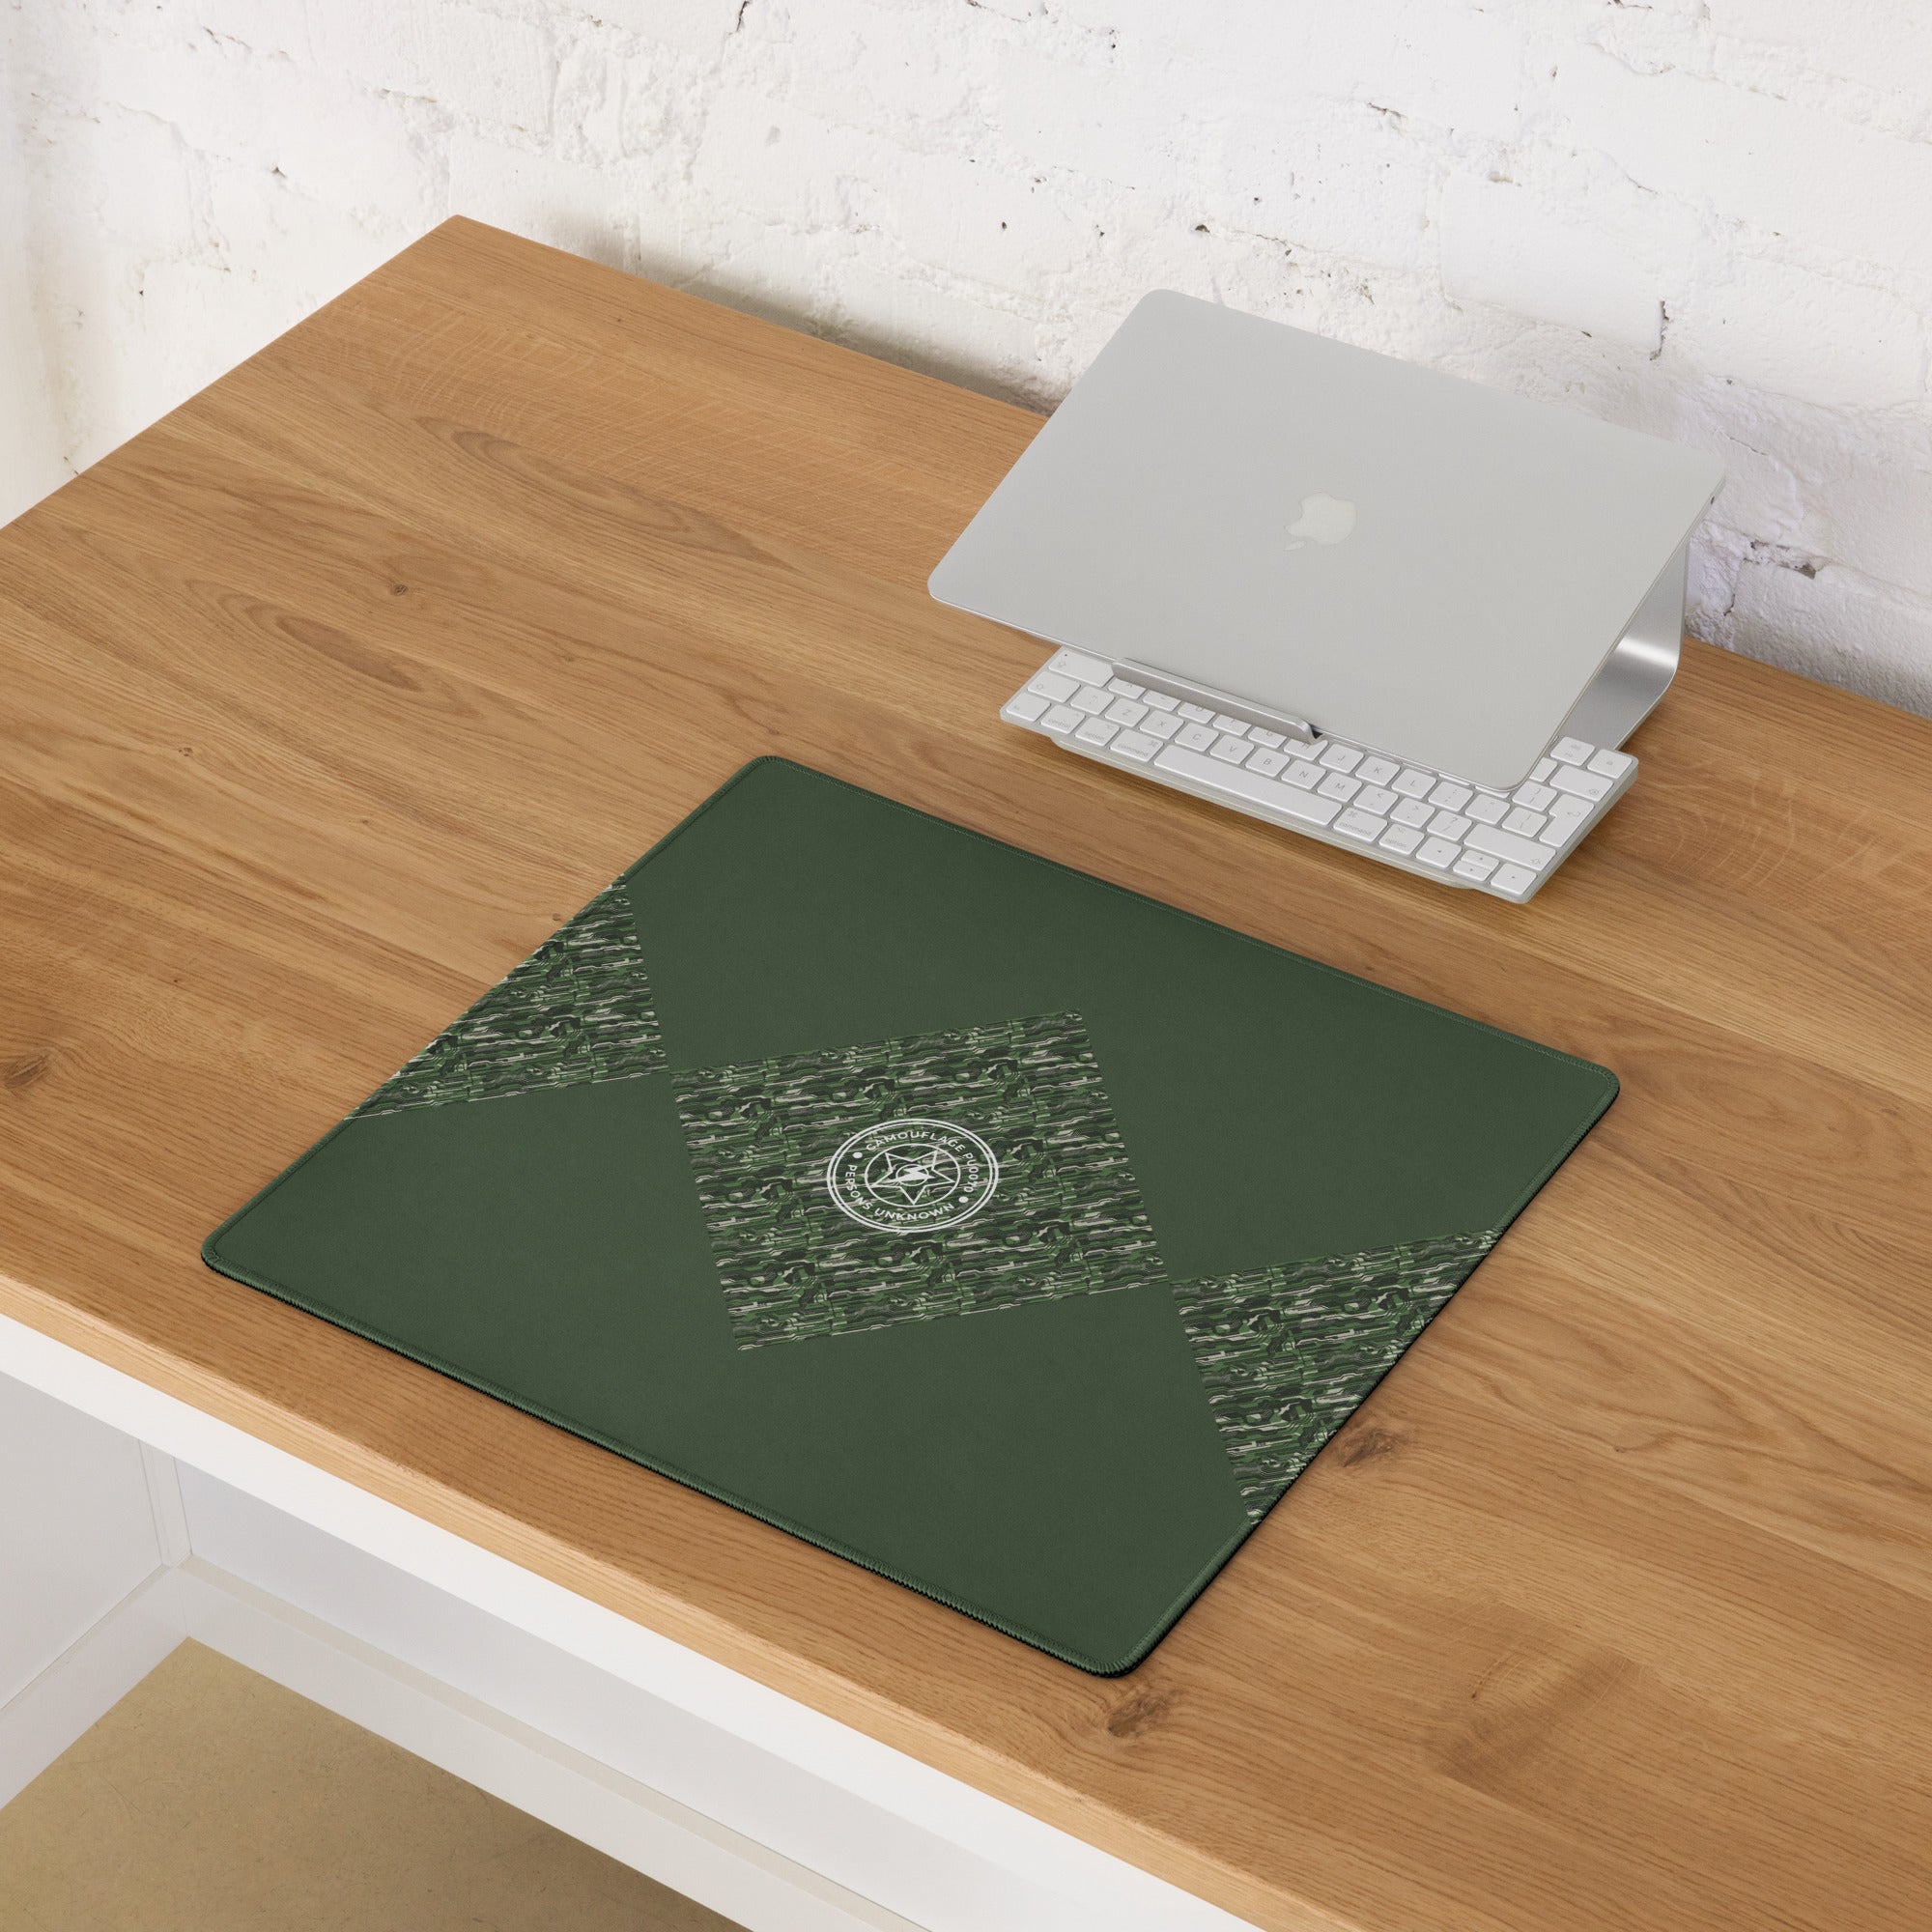 Camouflage PU0070 Gaming Mouse pad